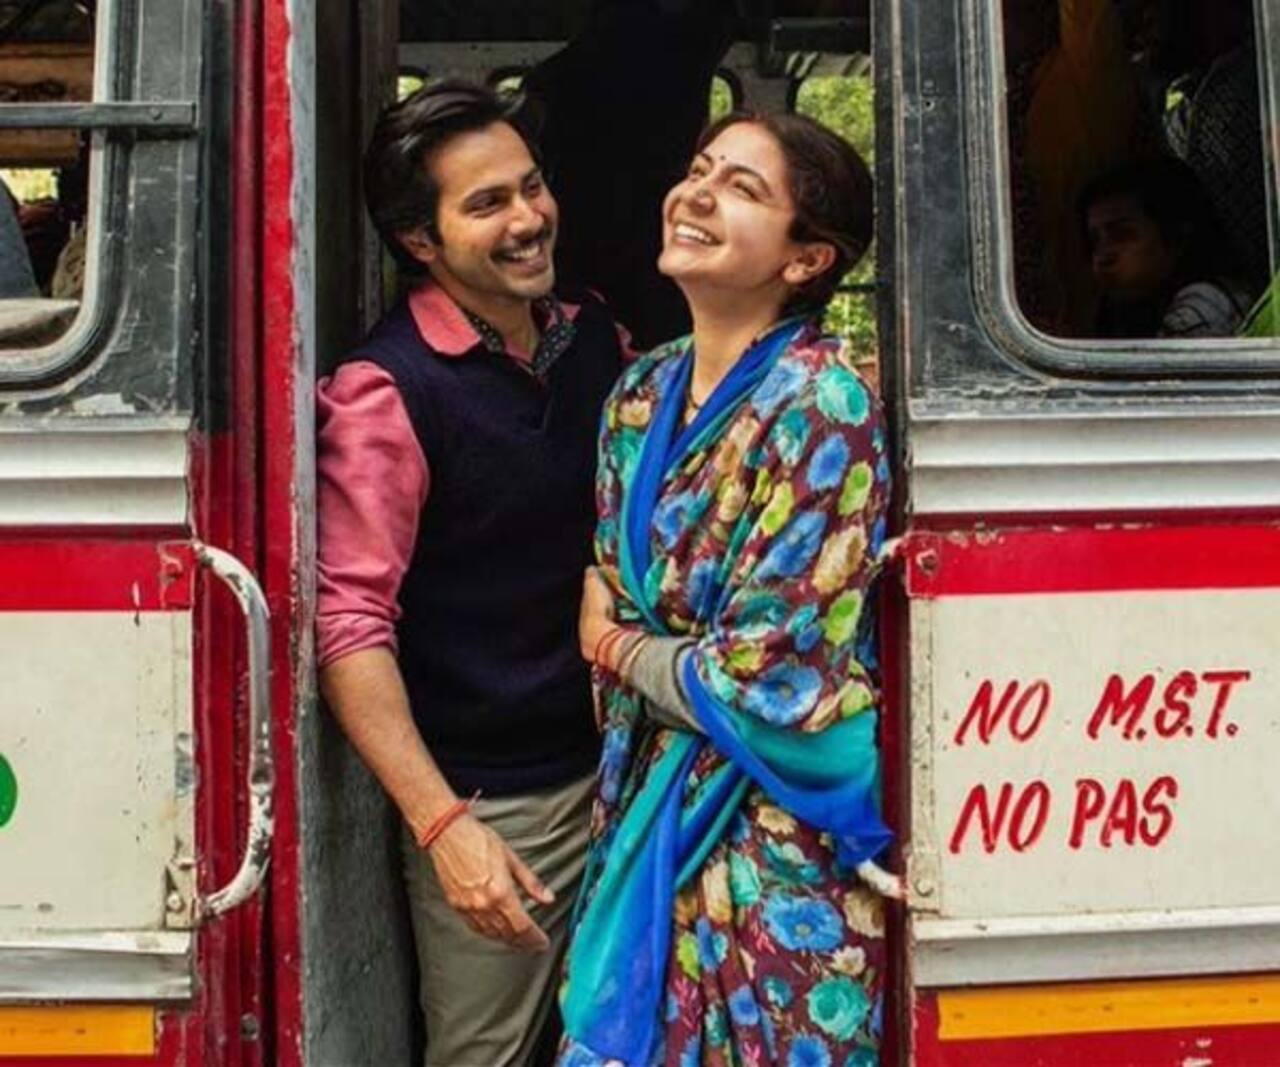 Did you know 15 artisans have crafted the logo of Anushka Sharma and Varun Dhawan's Sui Dhaaga?